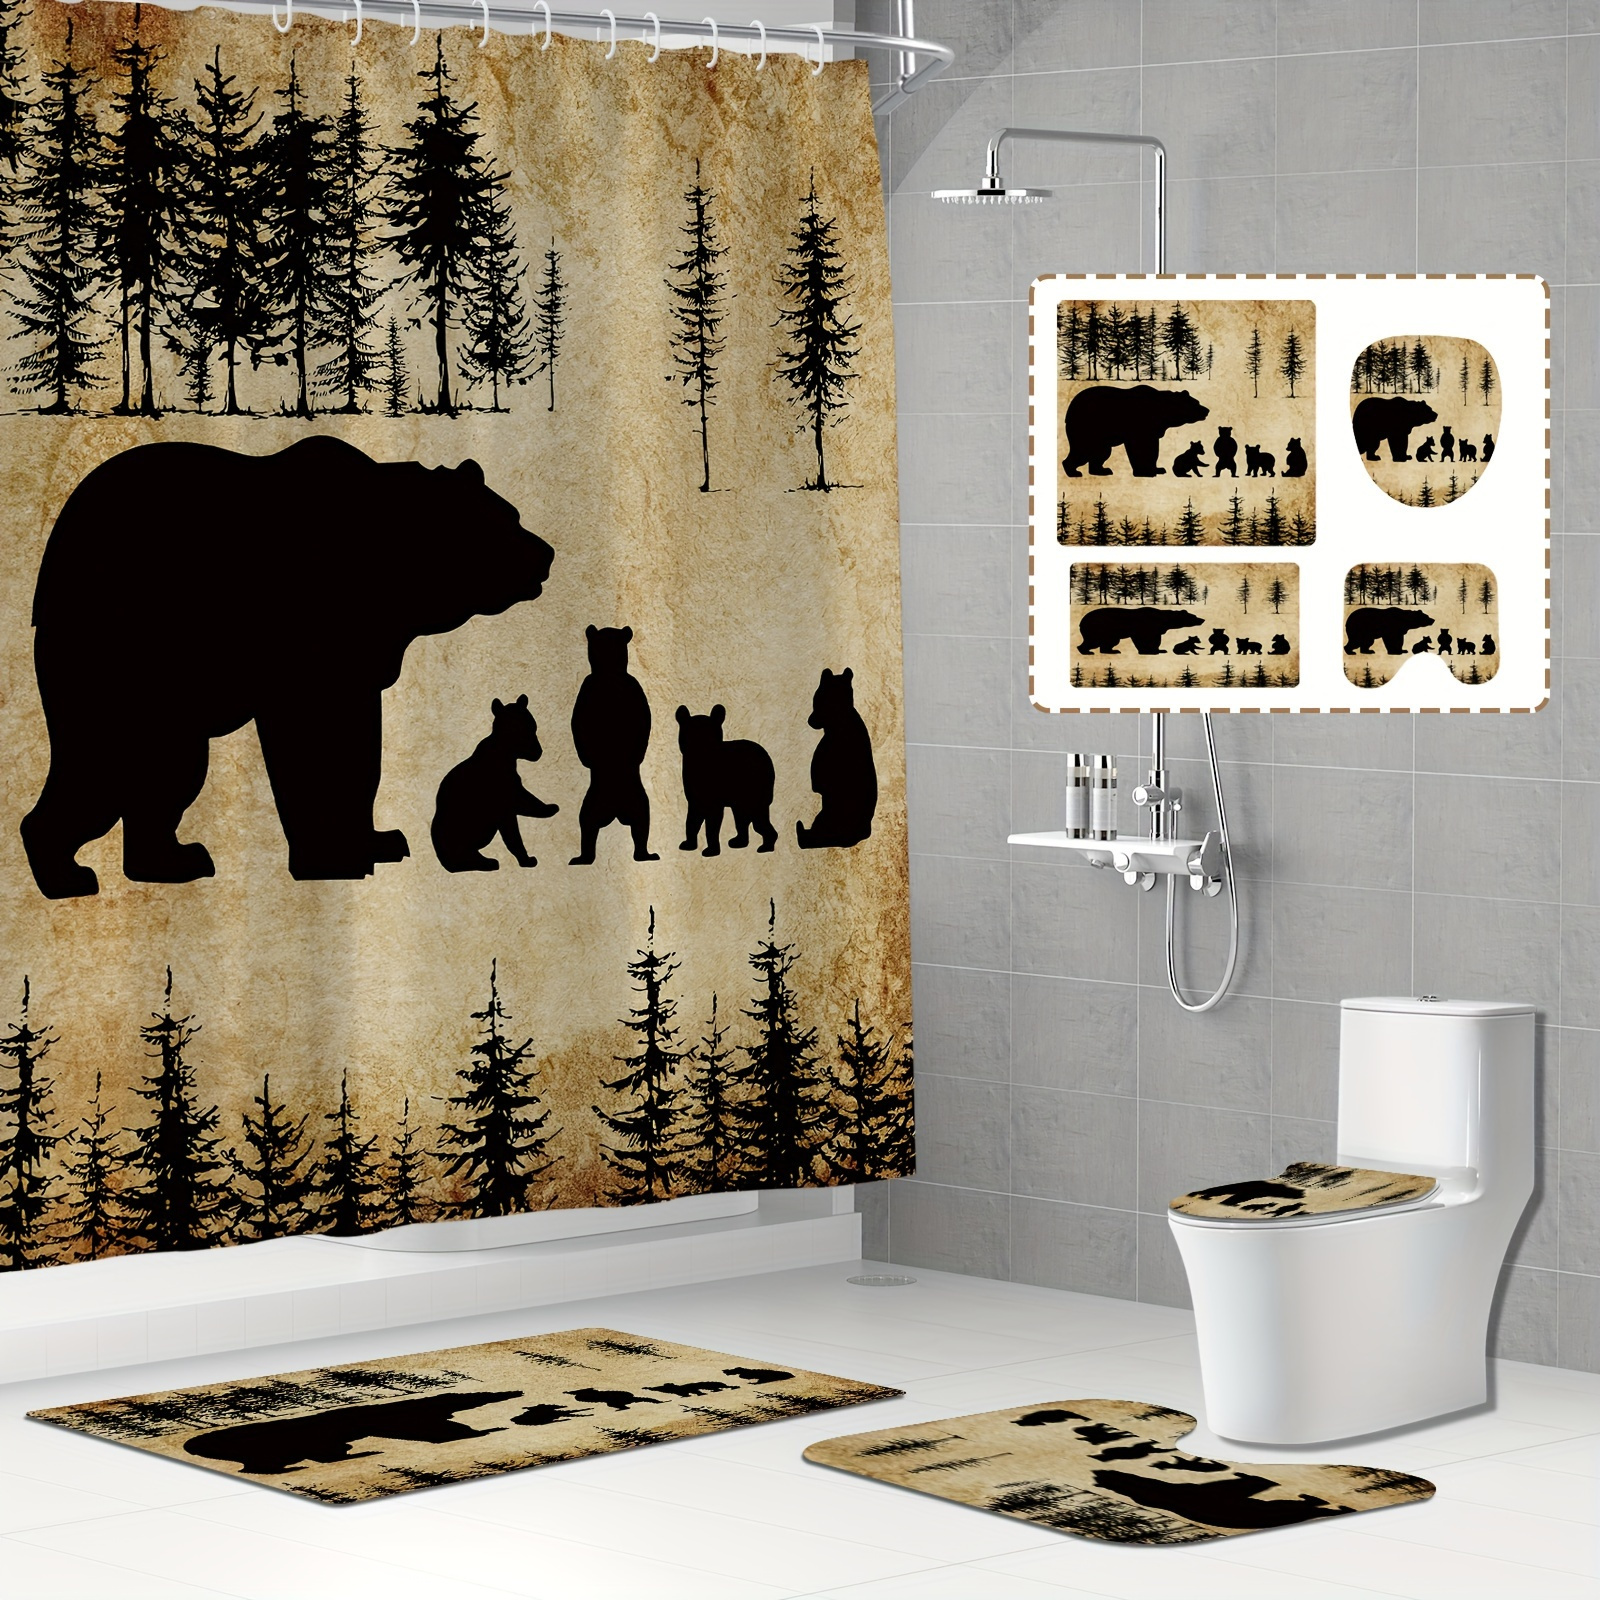 

Shower Curtain Set With Non-slip Bathroom Mats, Forest Wildlife Animal Print - Water-resistant Polyester Fabric, Machine Washable, Includes 12 Hooks, Pastoral Theme - All Seasons Universal